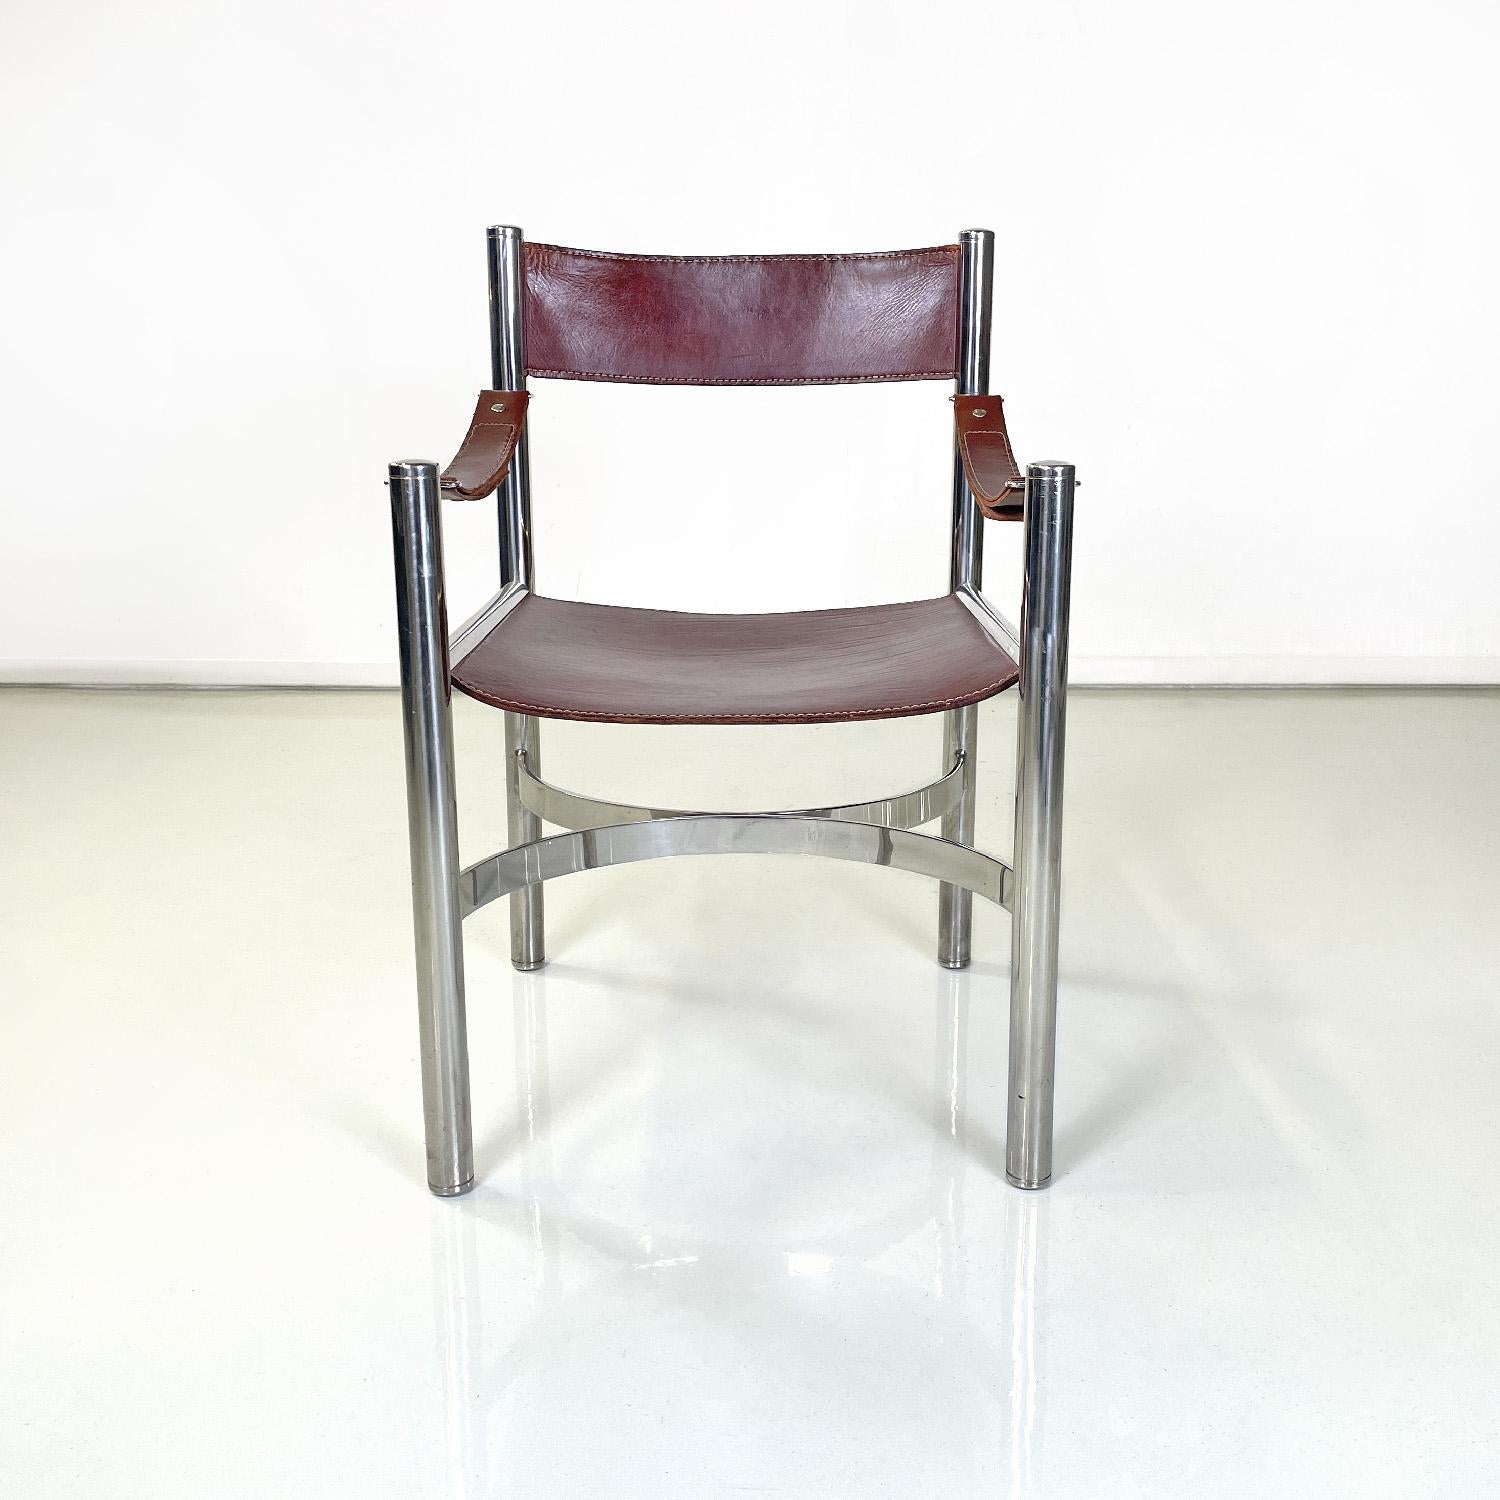 Italian modern brown leather chairs with chromed steel structure by D.I.D, 1970s In Good Condition For Sale In MIlano, IT